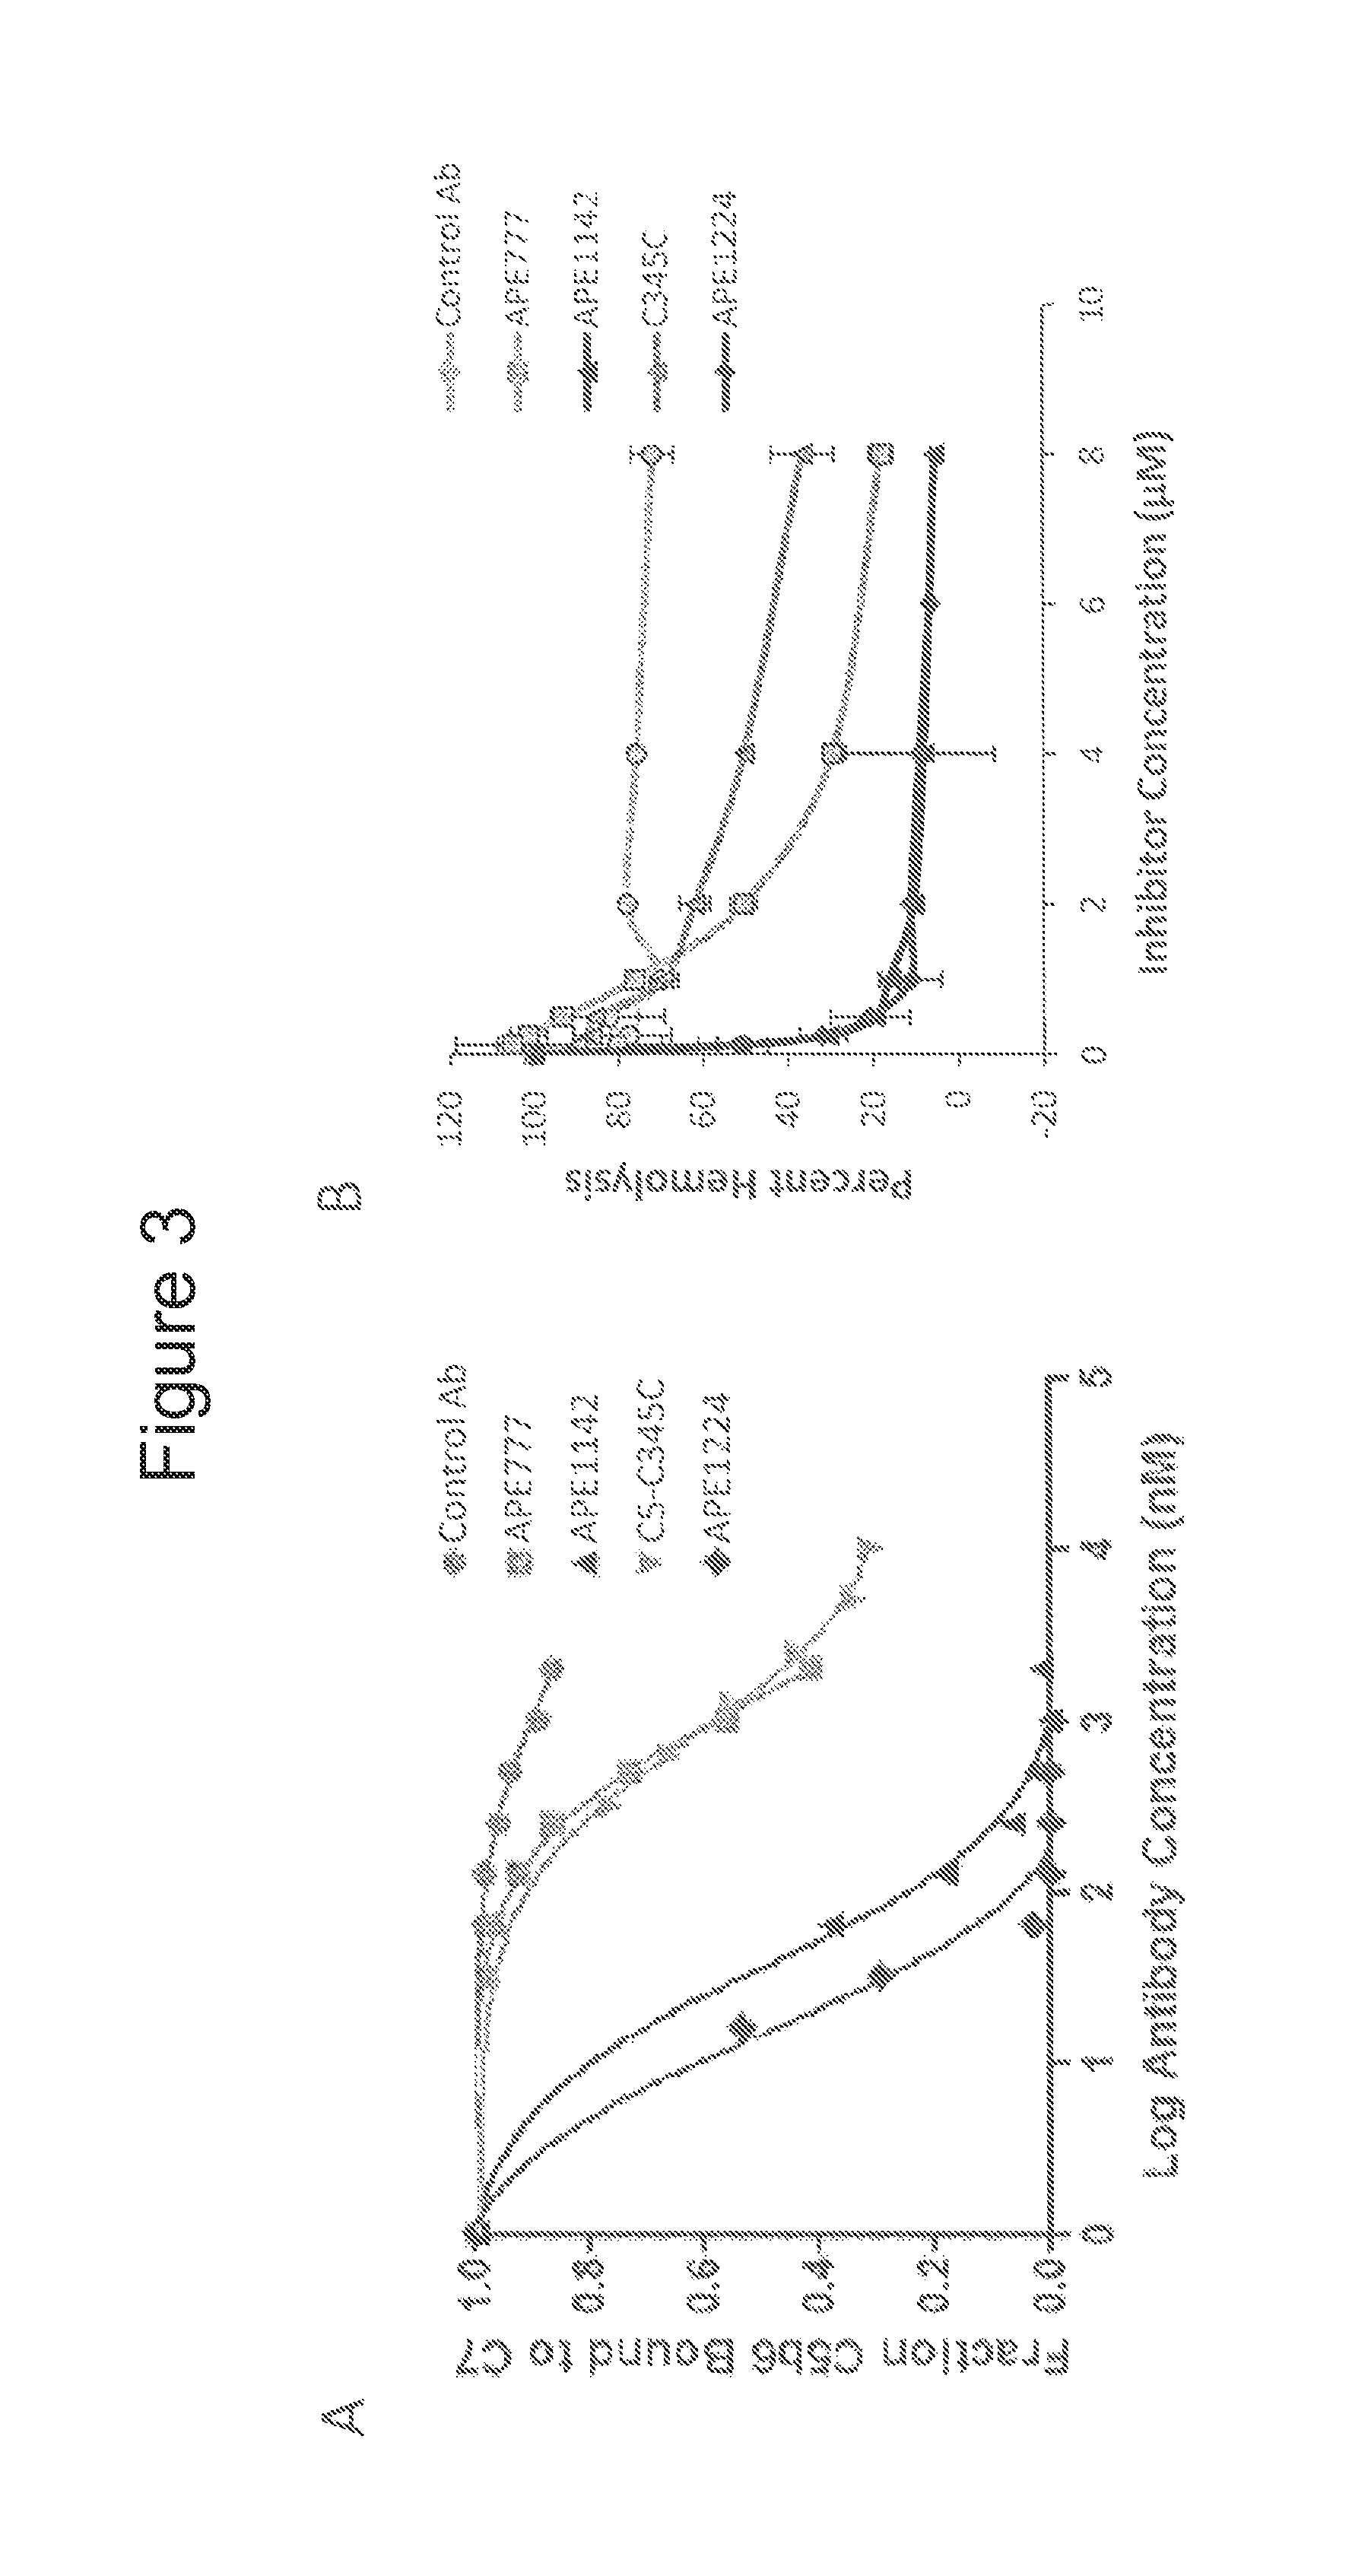 Humanized antibodies directed against complement protein C5